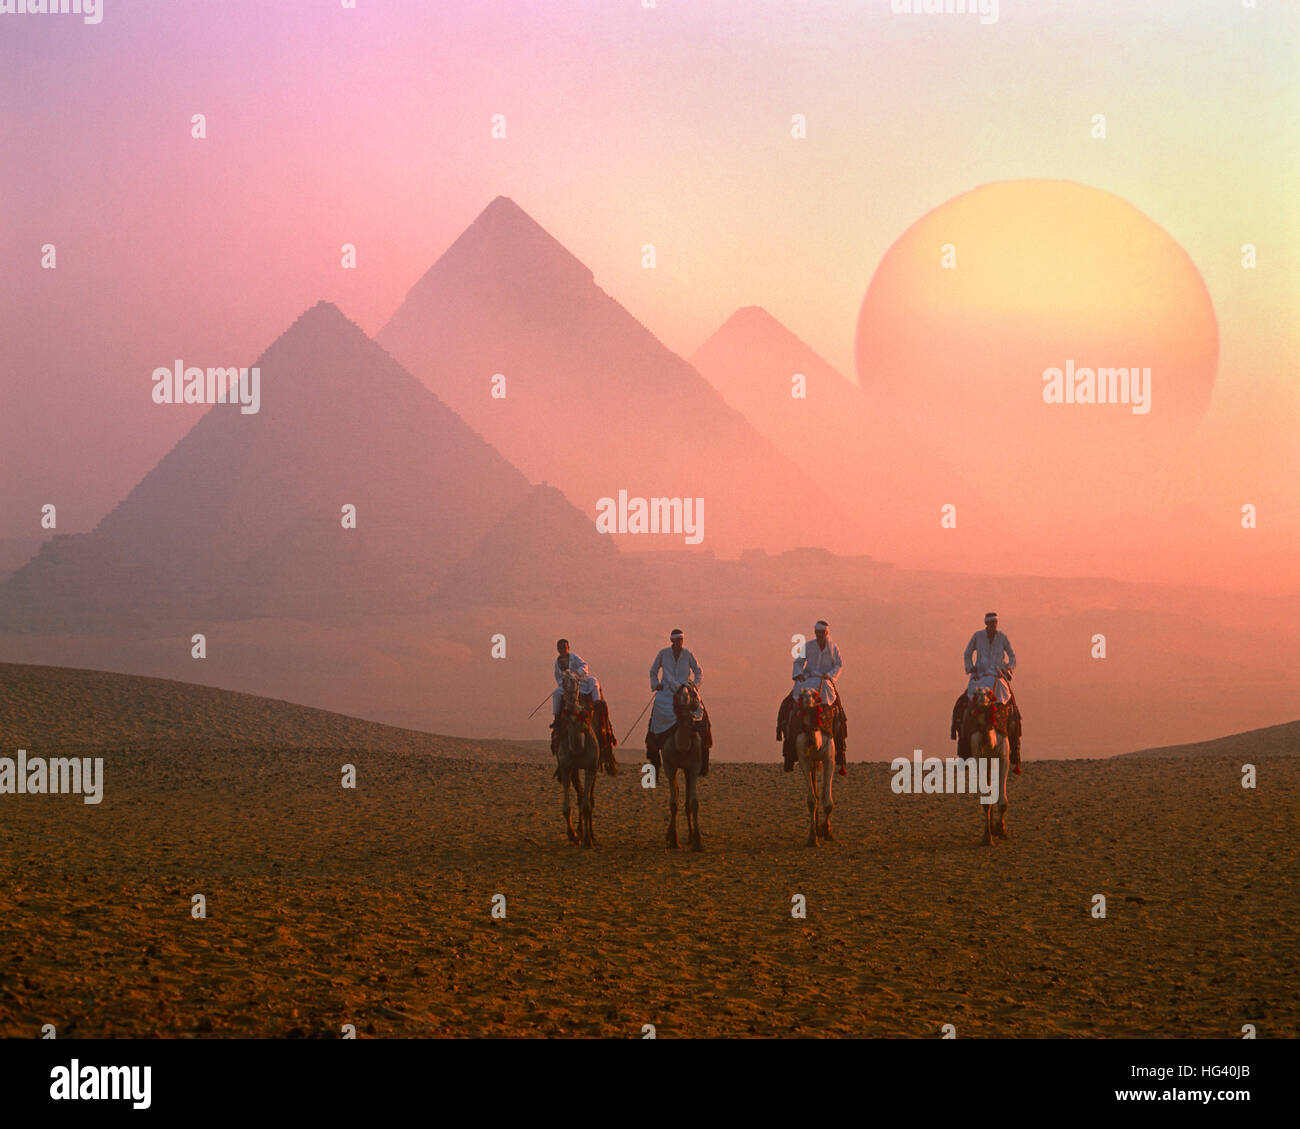 Four camel riders, the Pyramids and the rising sun, Giza, Cairo, Egypt Stock Photo